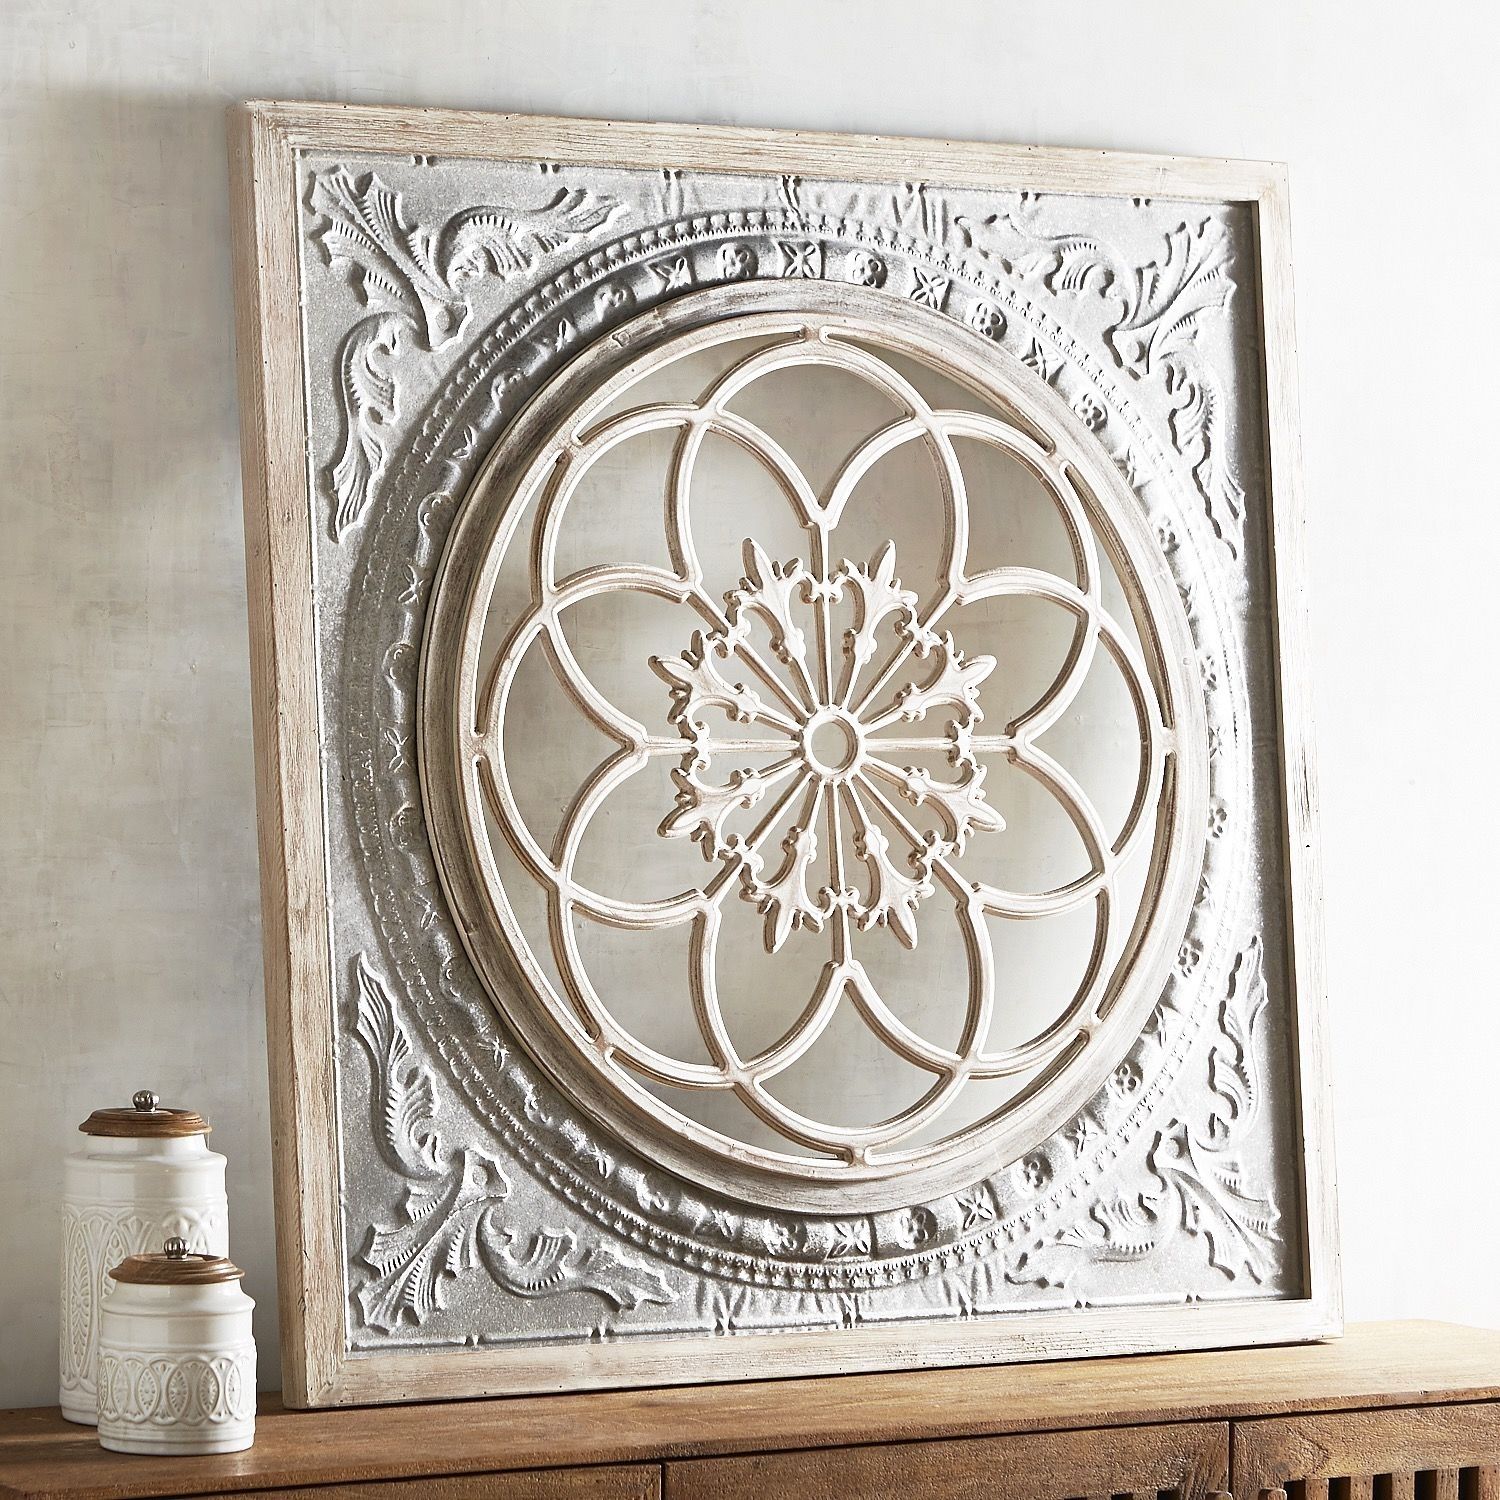 Galvanized Medallion Wall Decor Pier 1 Imports, Pier 1 Wall Art With Pier 1 Wall Art (Photo 18 of 20)